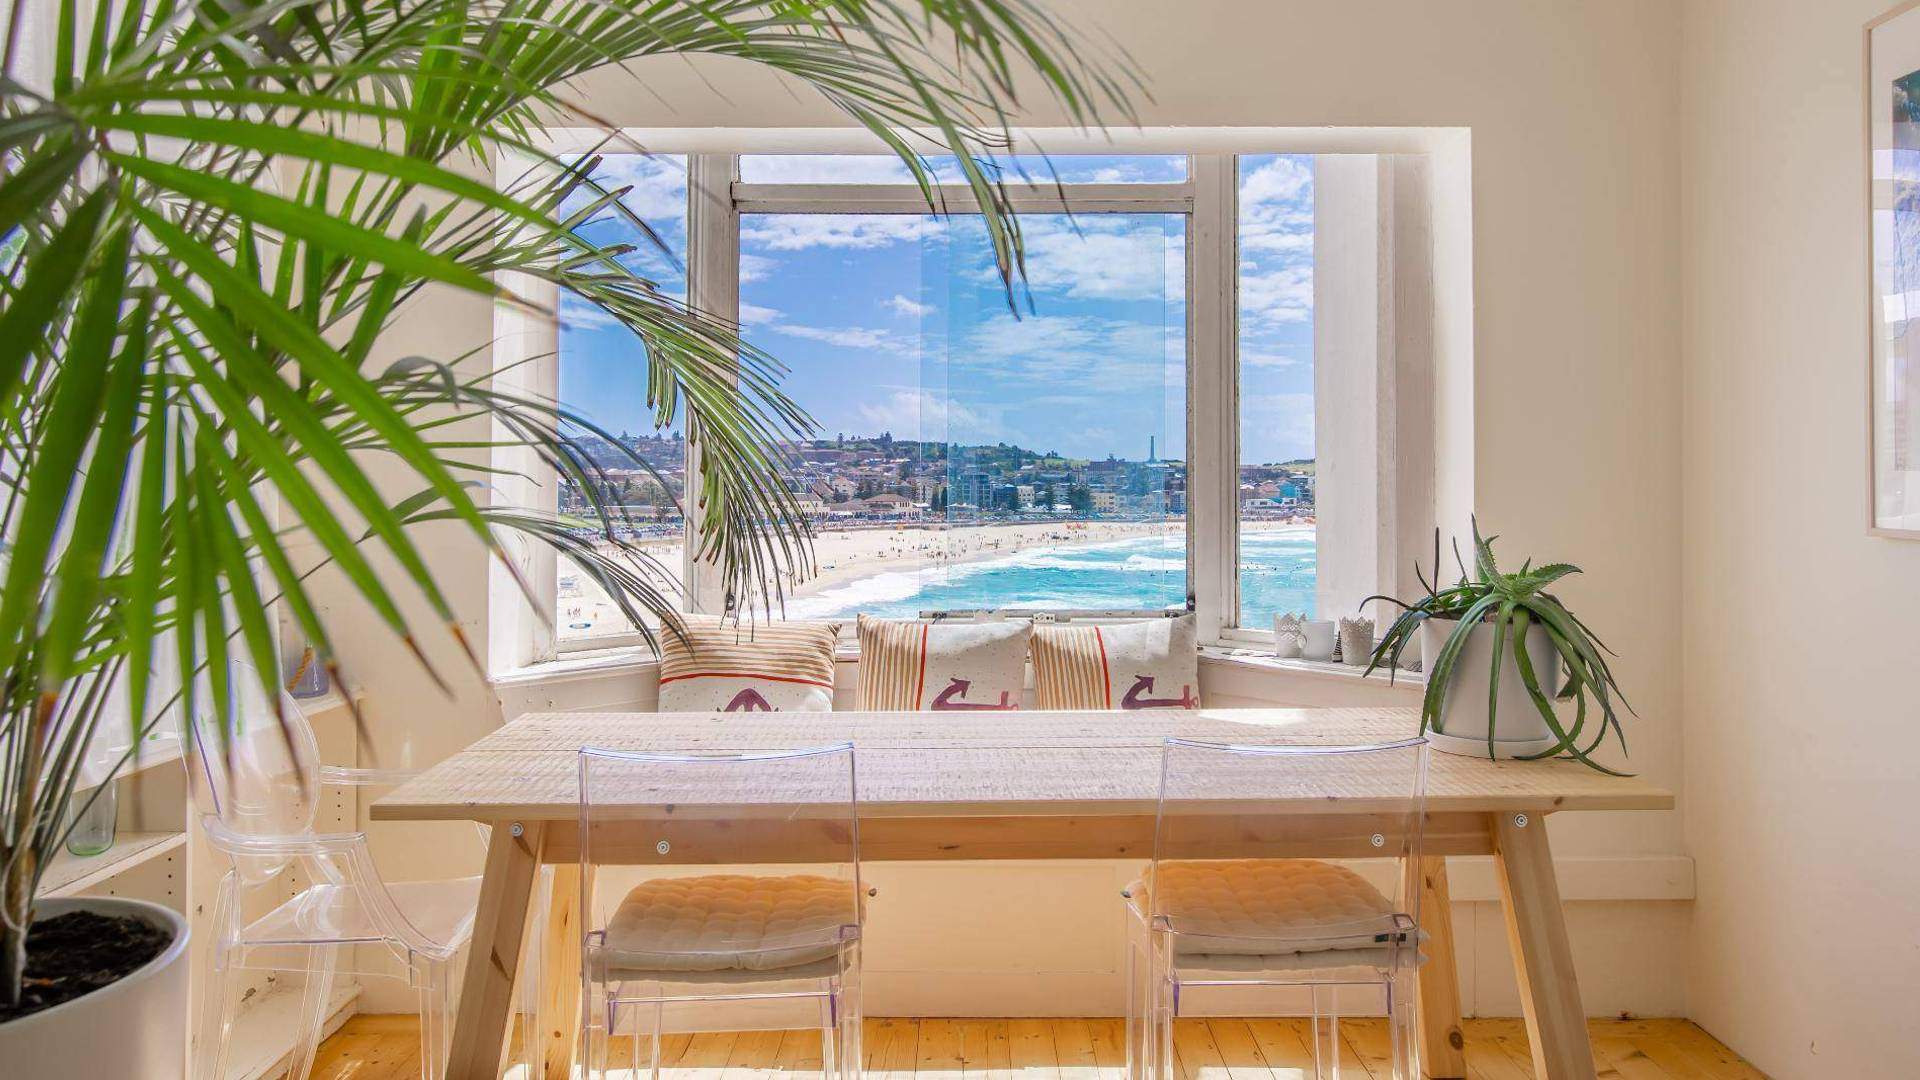 All of the Best Inner City Airbnbs Around Australia with Breathtaking Views